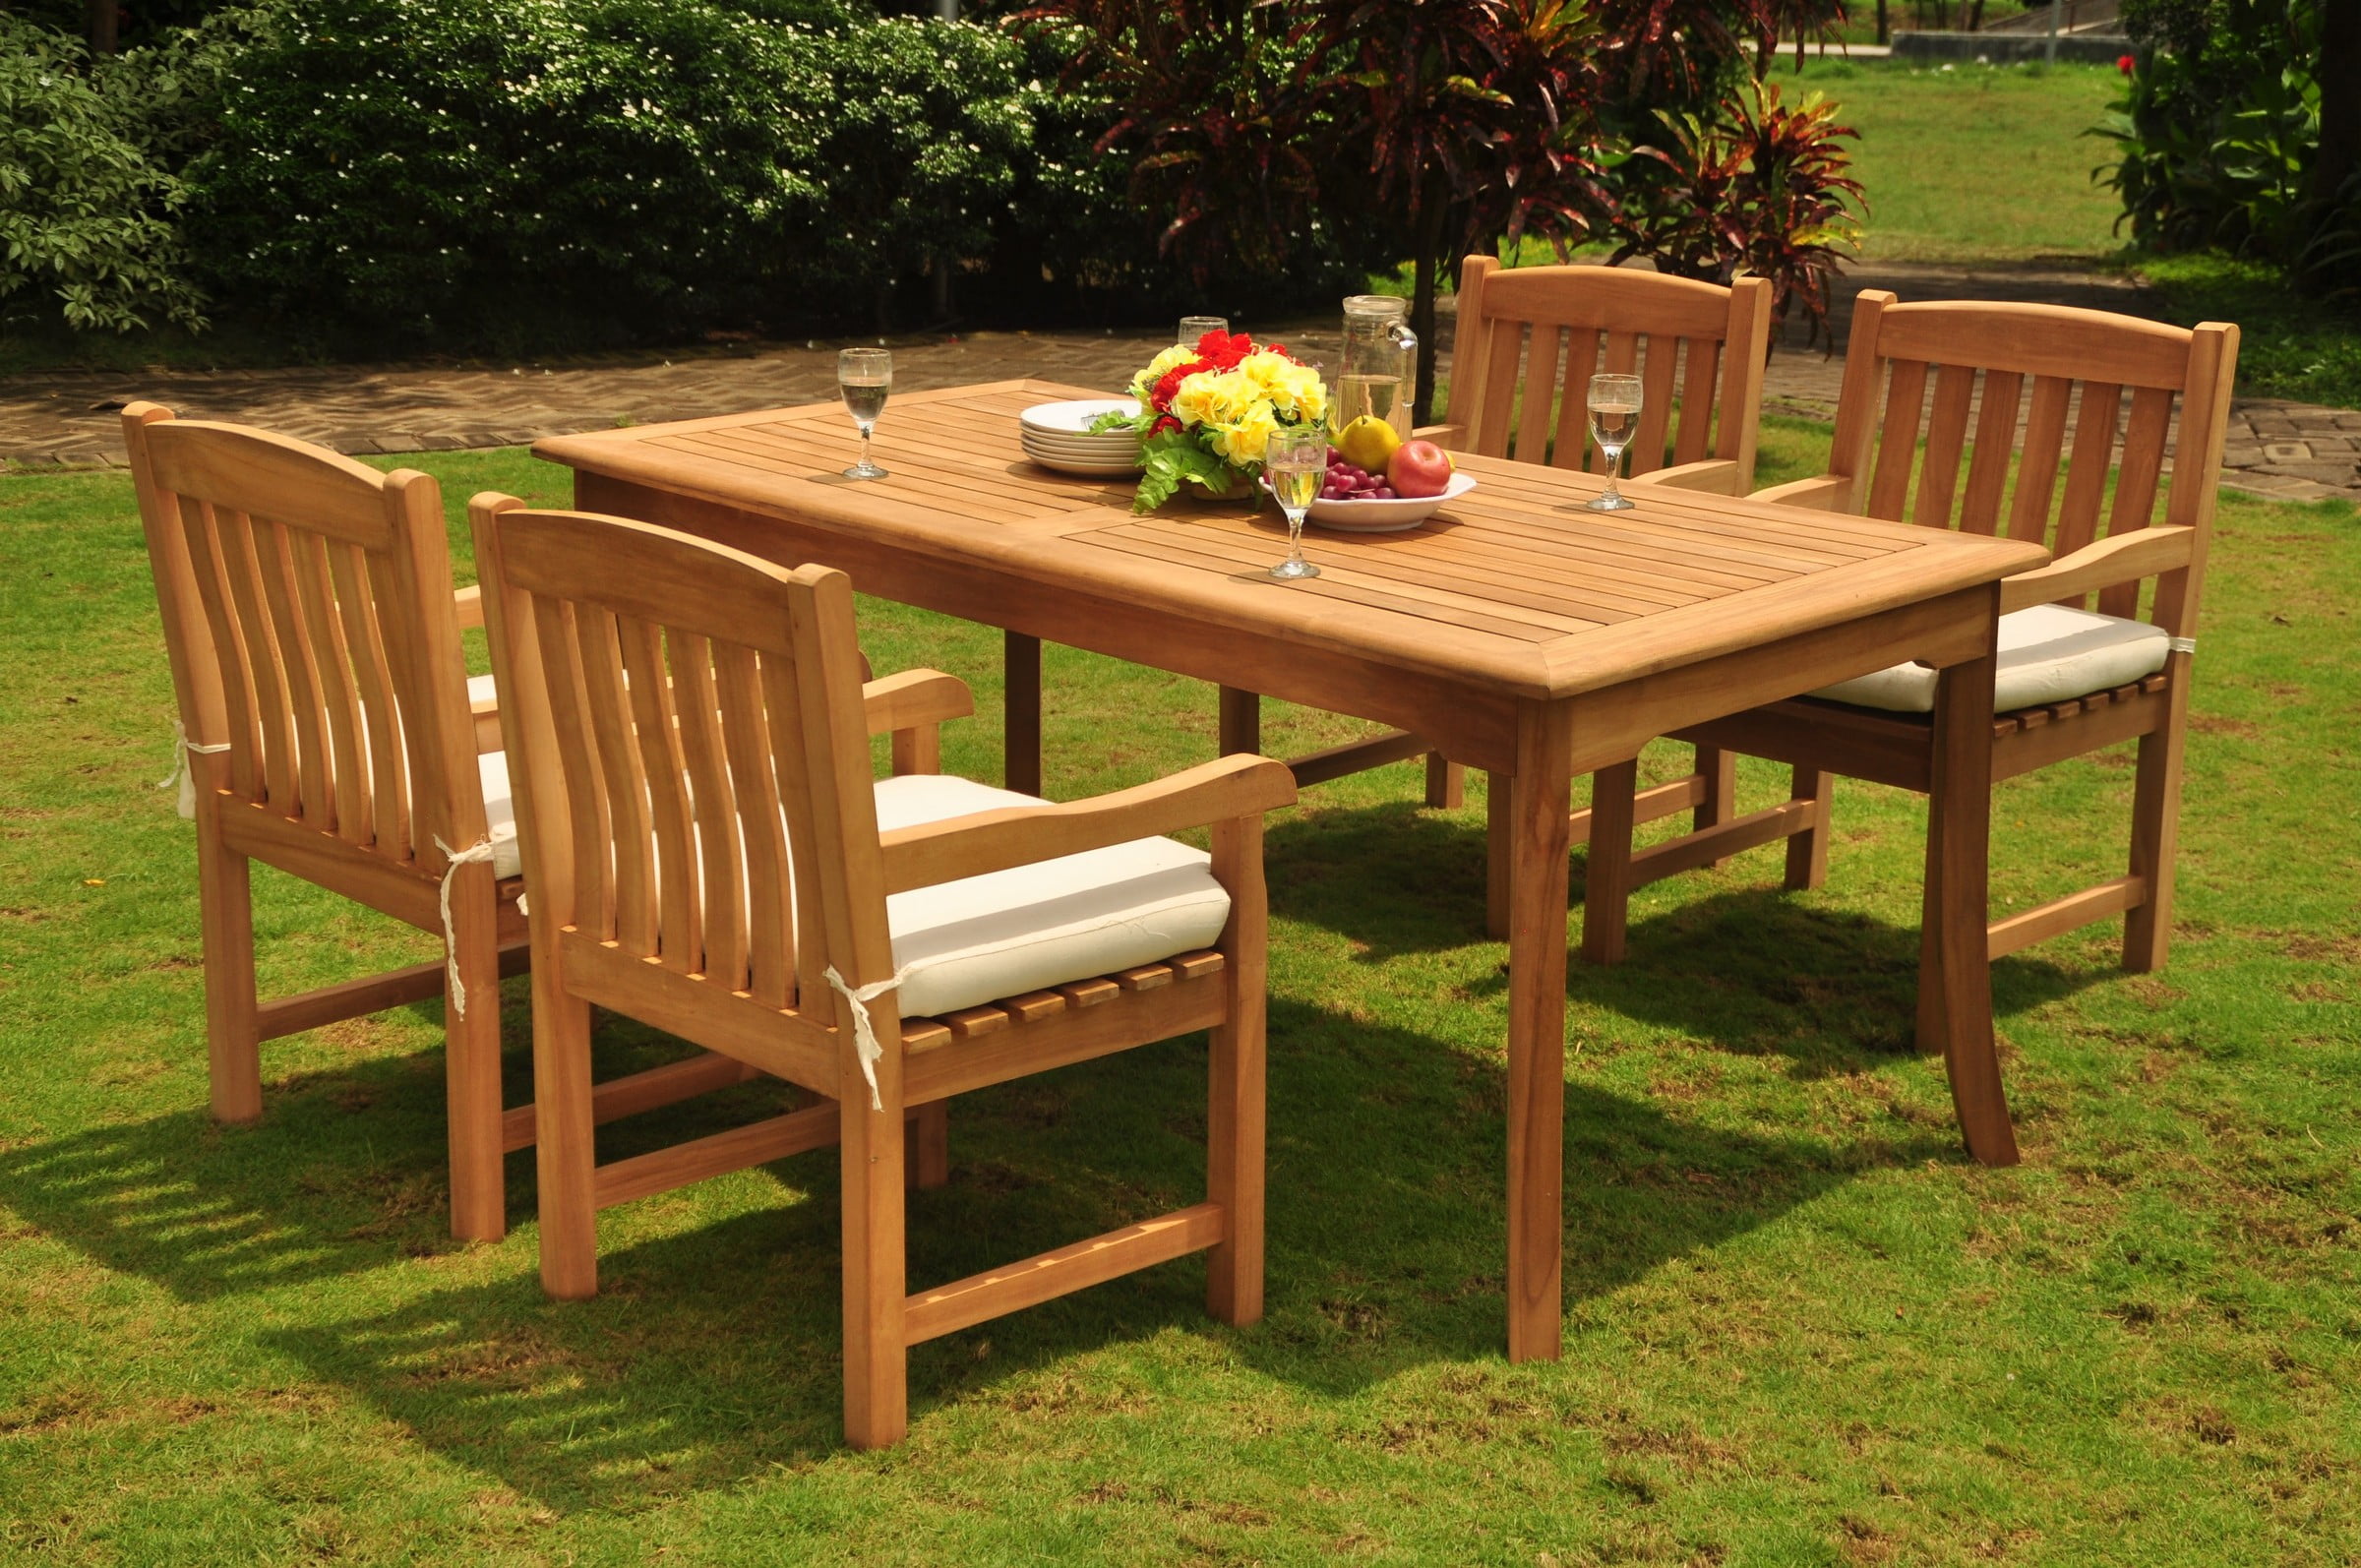 Minimalist Rustic Or Chic: Teak Patio Furniture Styles For Every Preference